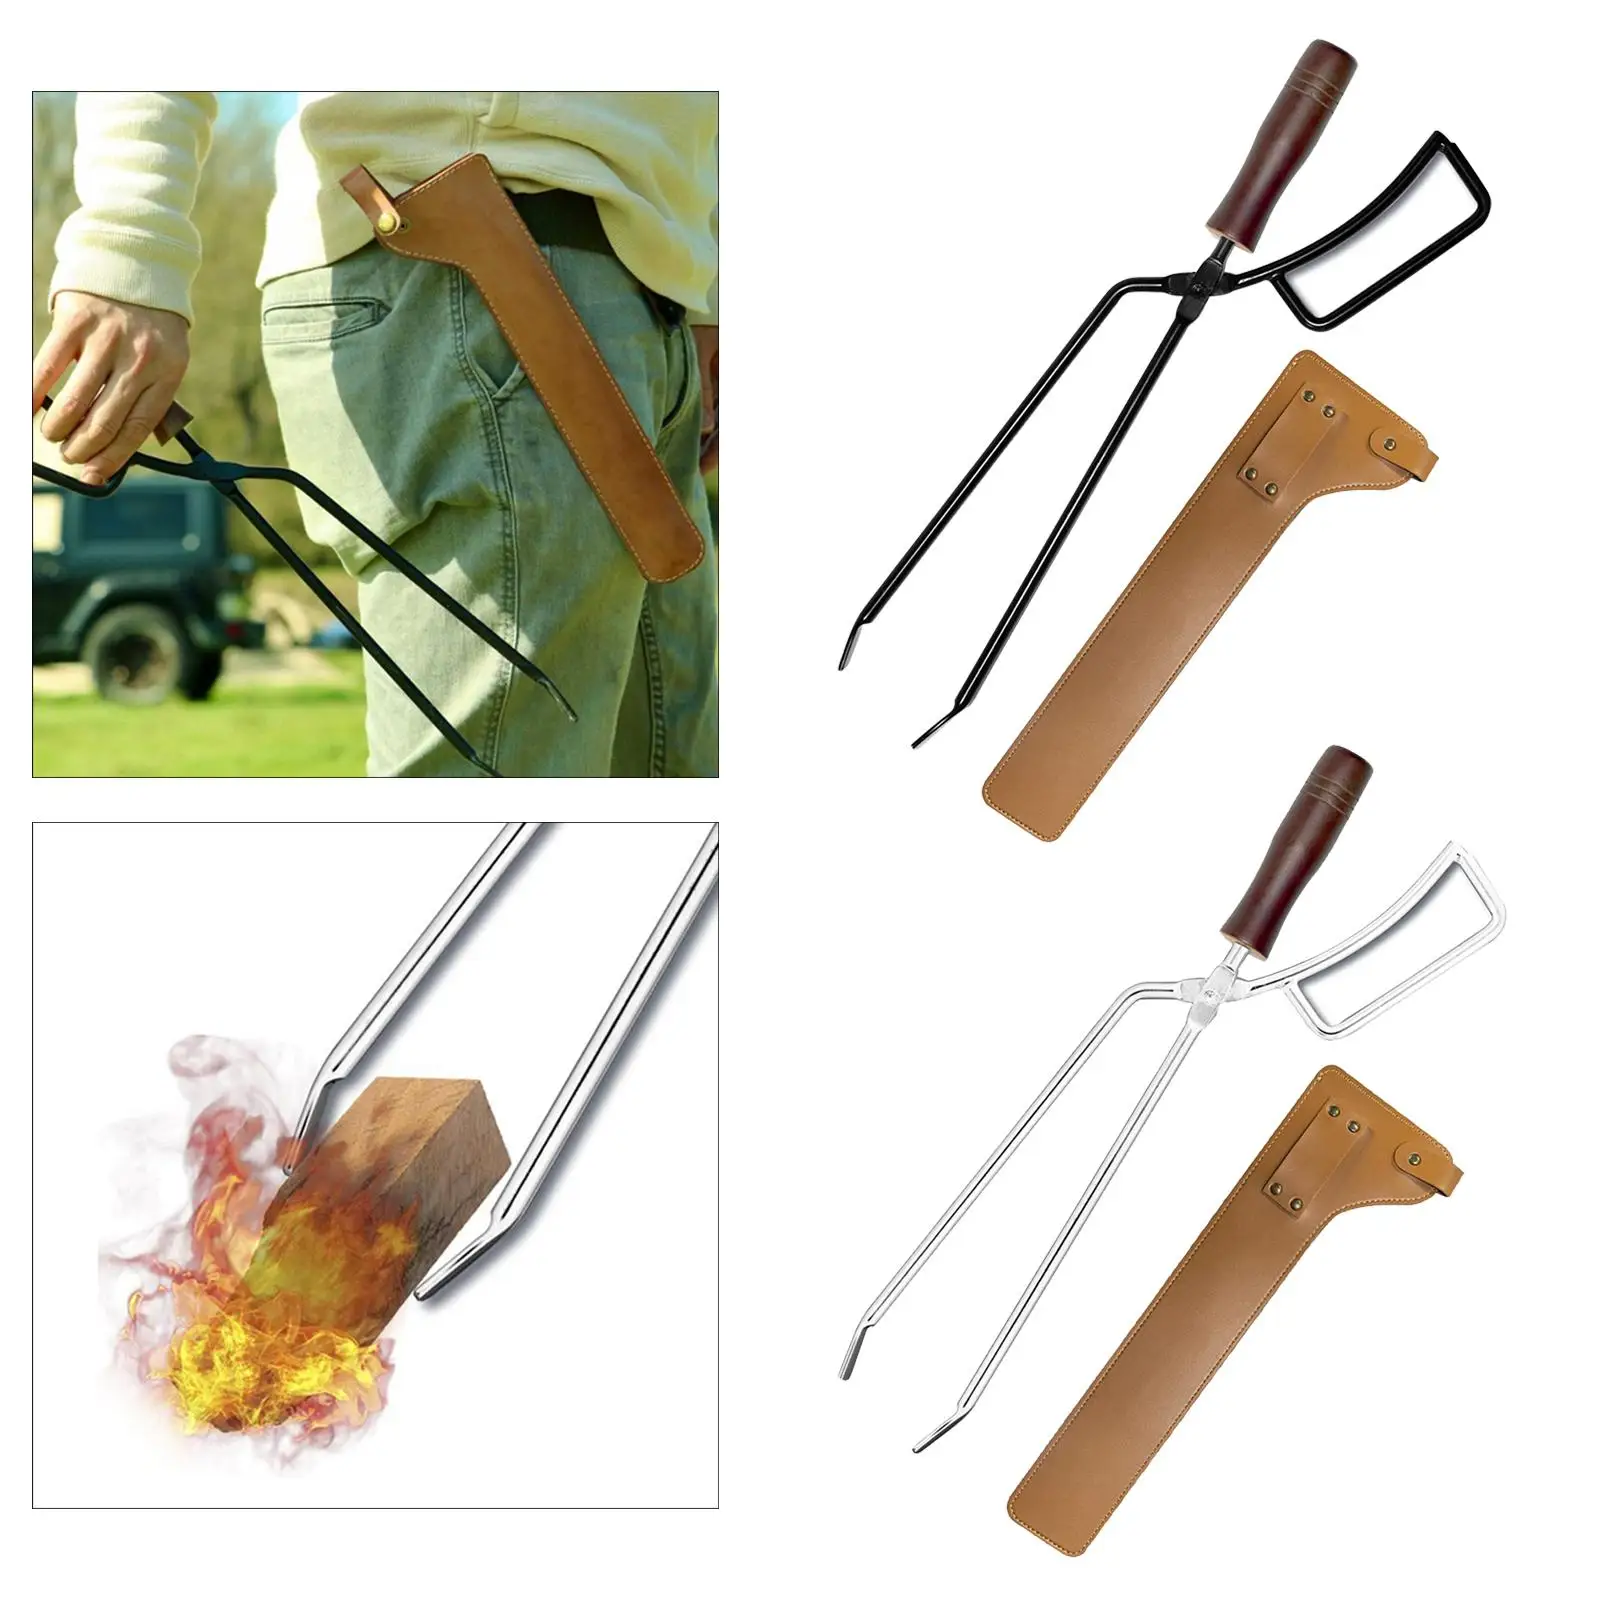 Fireplace Fire Tongs Stainless Steel/Iron Barbecue with Carry Bag Heat Insulation Grabber Portable Fire Tongs for Party Kitchen